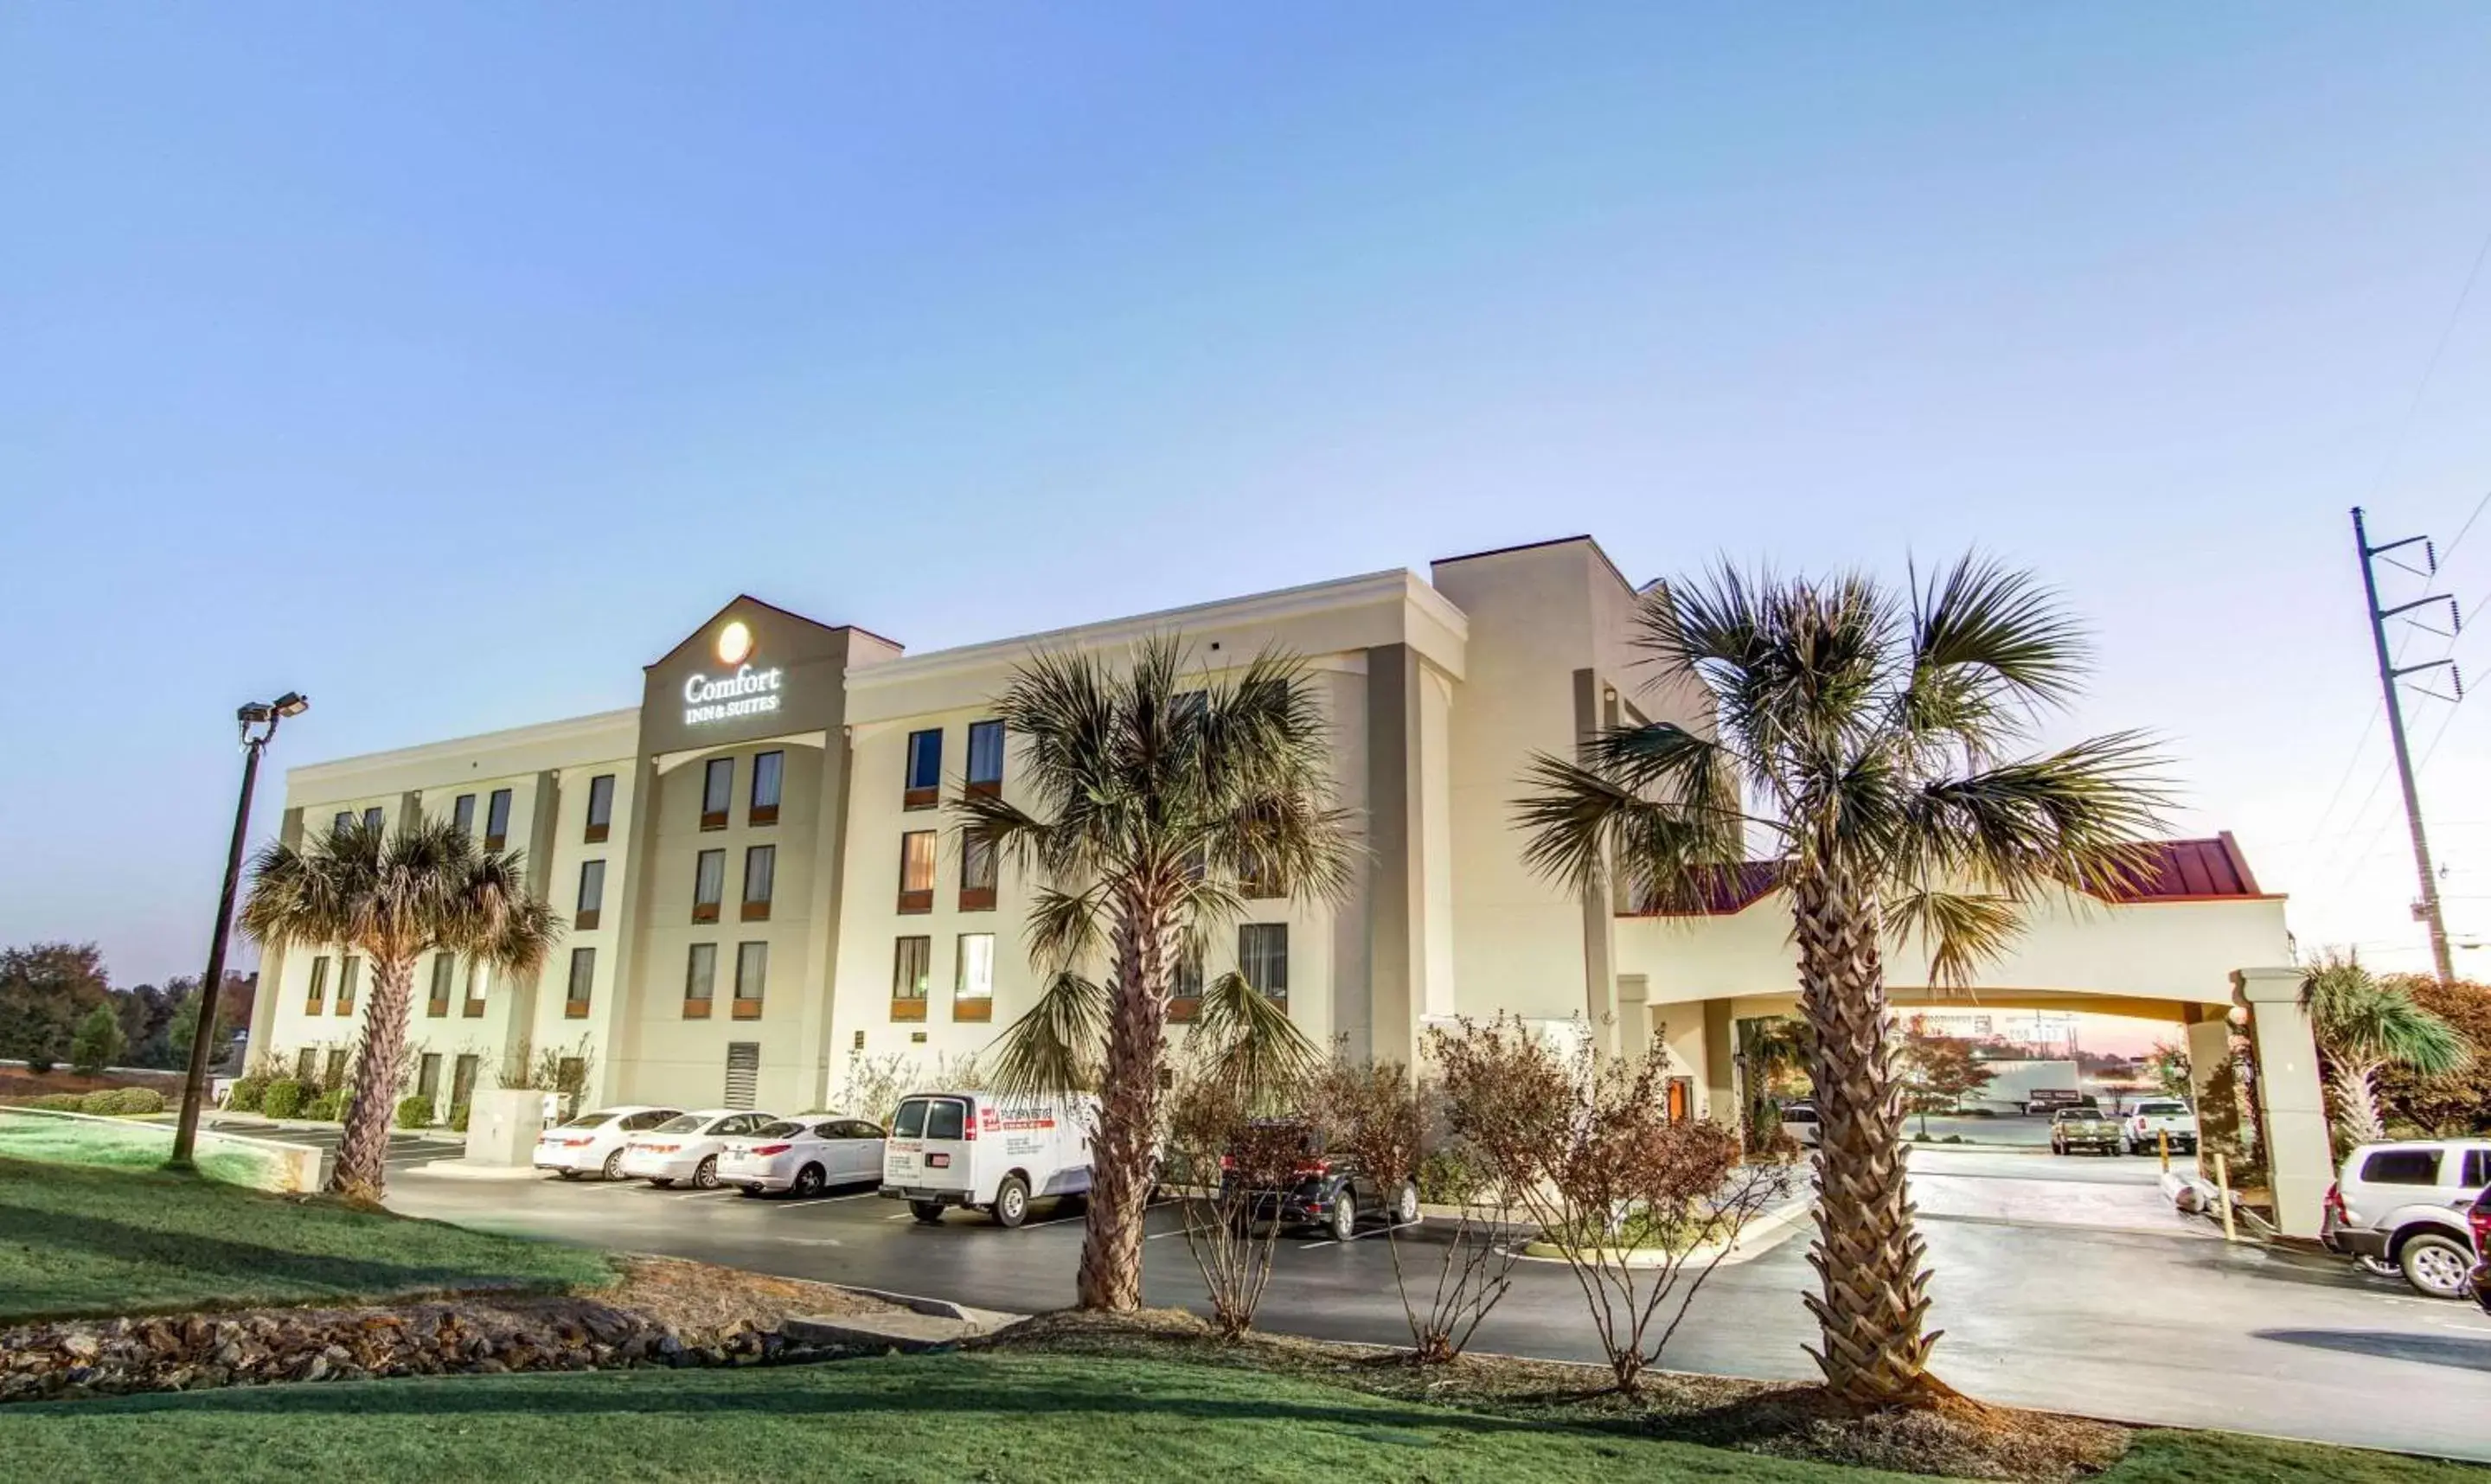 Property building in Comfort Inn & Suites Athens